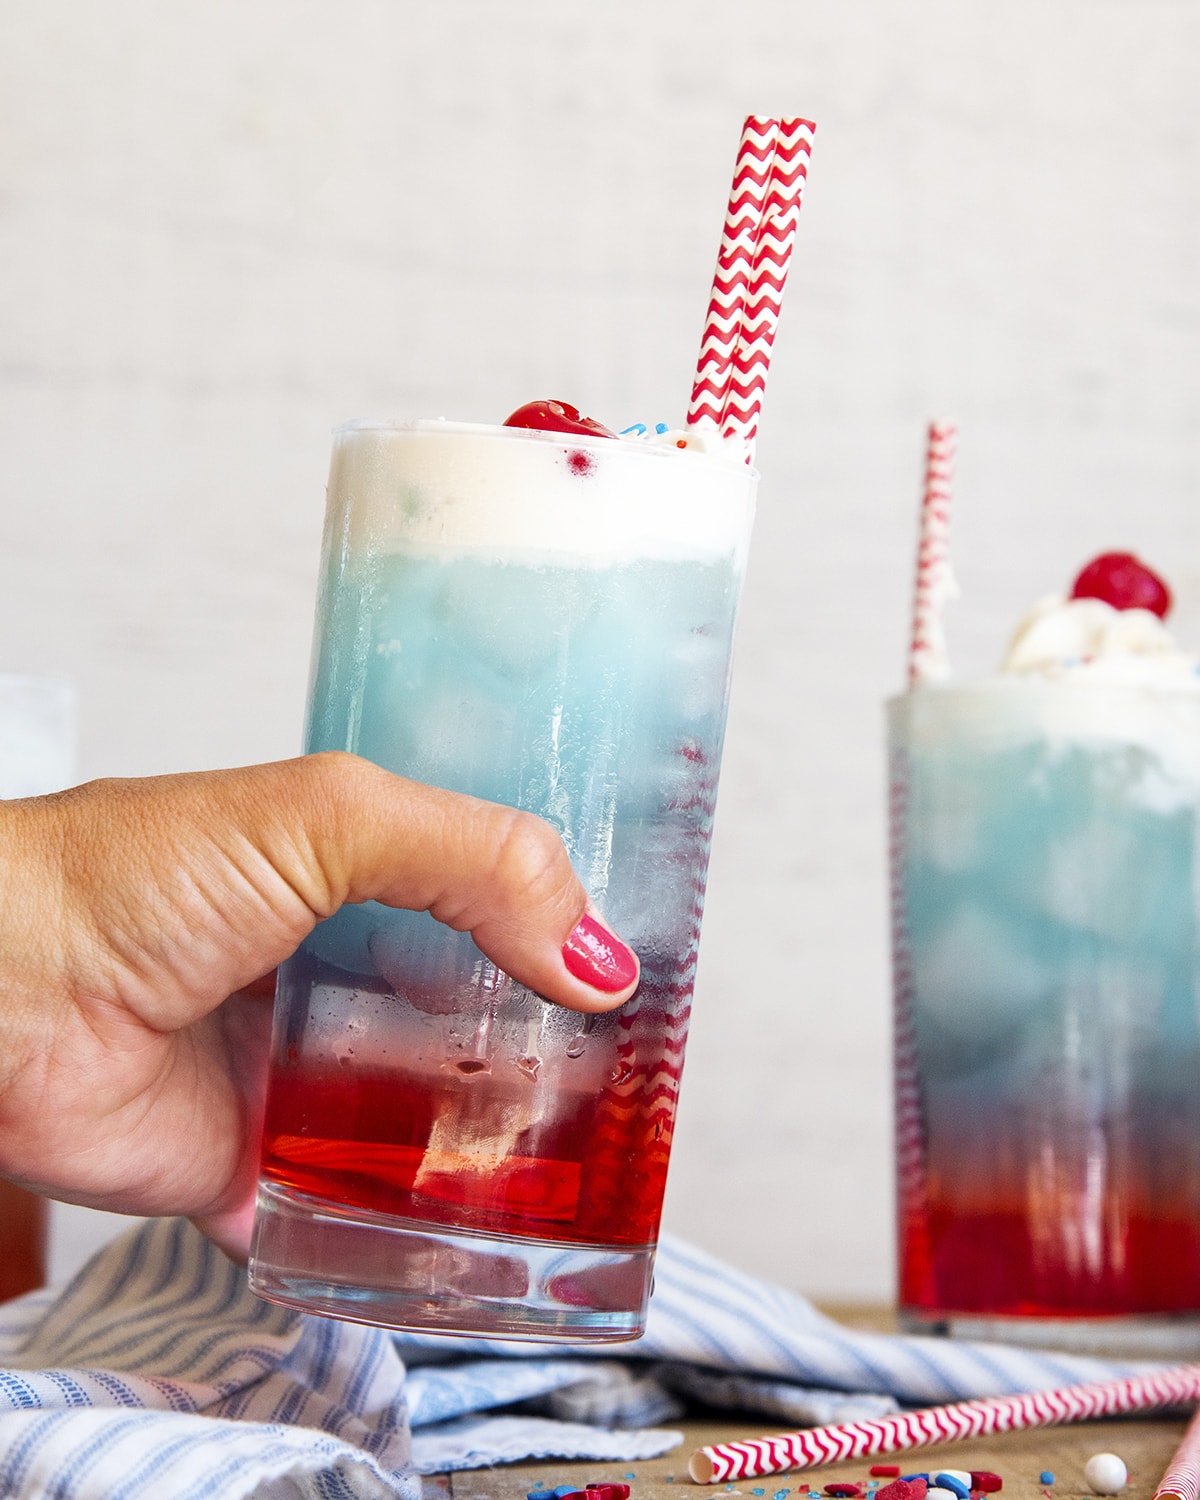 A hand holding a glass of a drink that is red on bottom, blue on top, and topped with whipped cream.